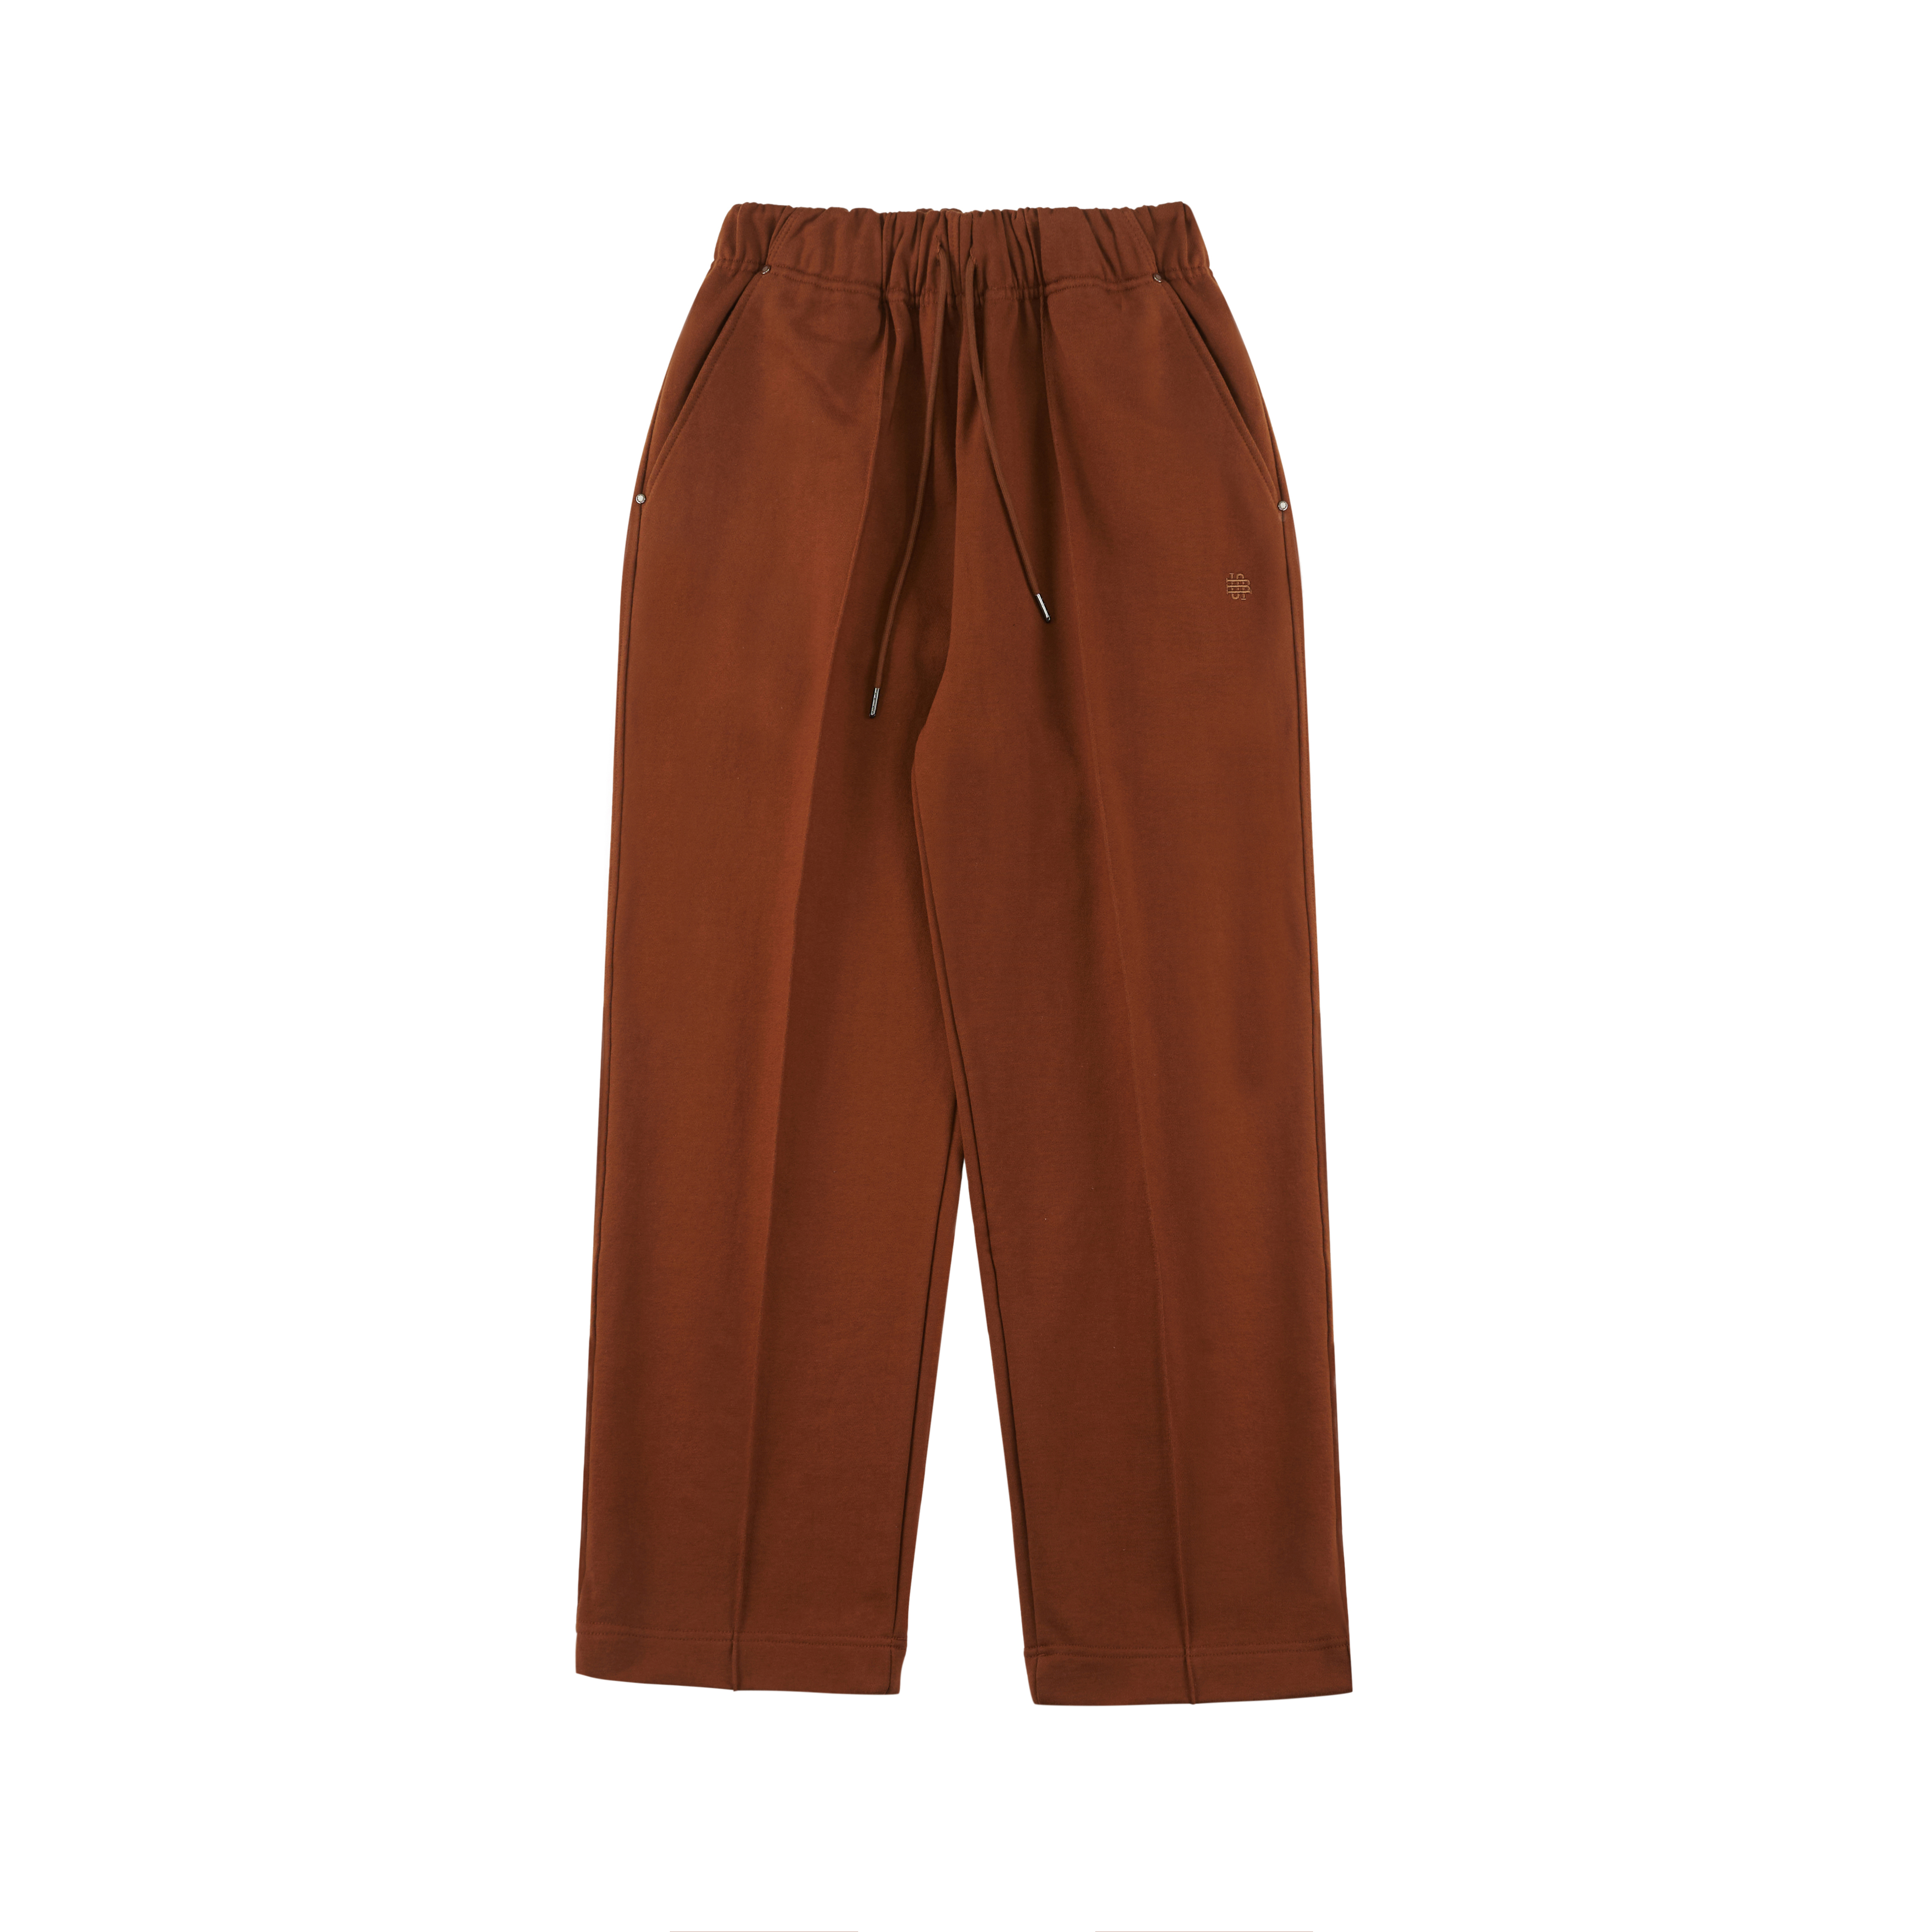 3.52 POUNDS BROWN SWEAT TRAINNING PANTS